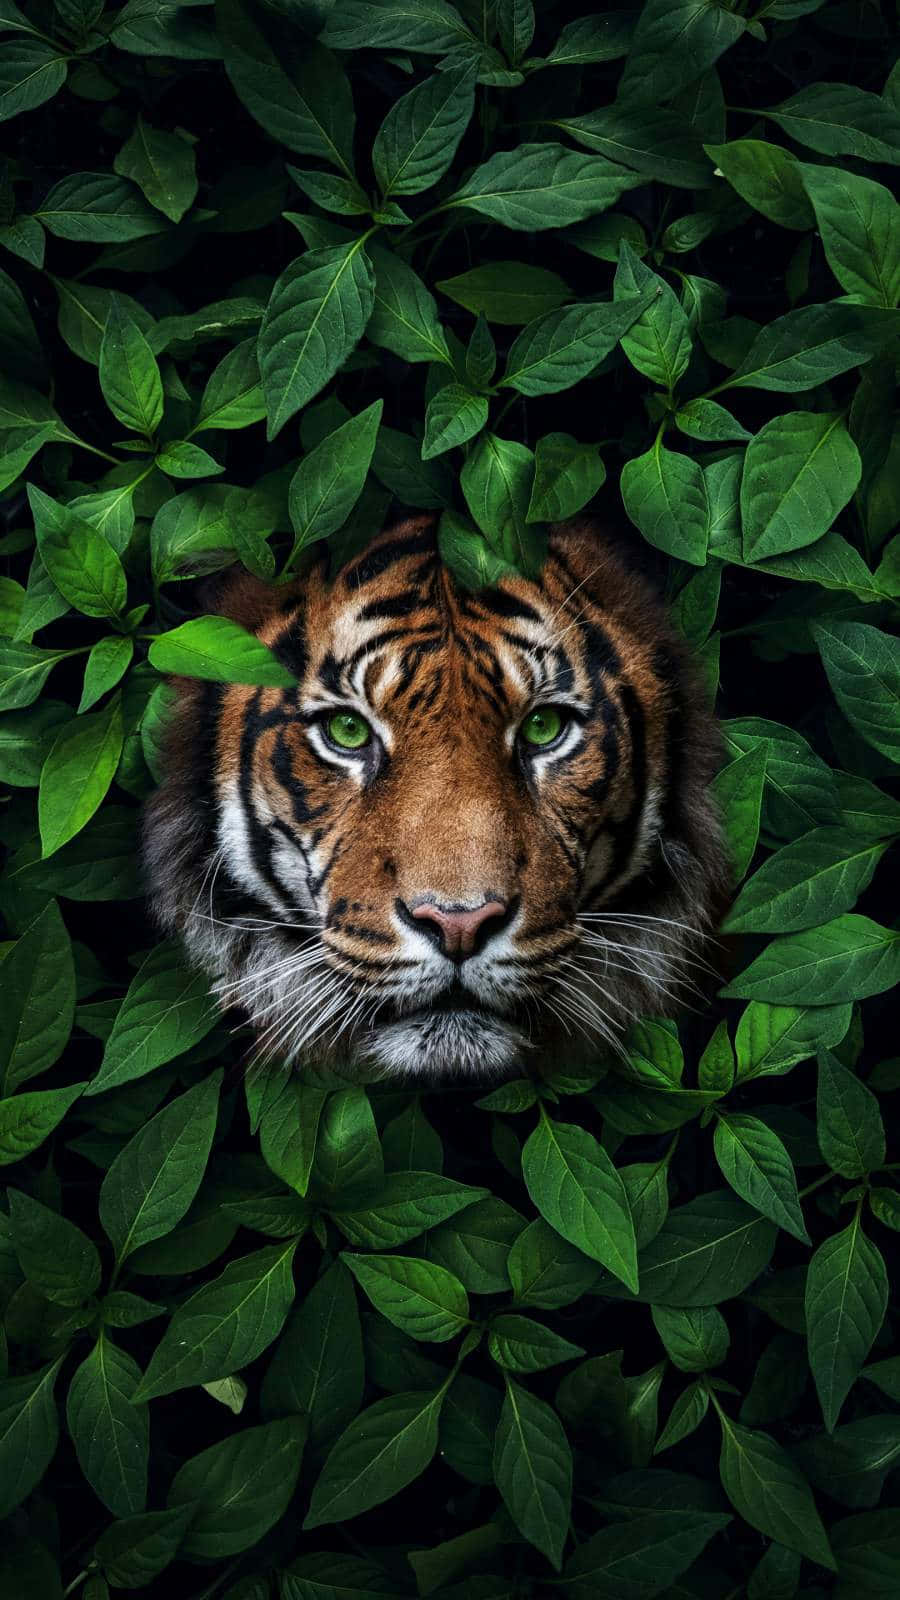 Tiger With Green Eyes In Bush Background